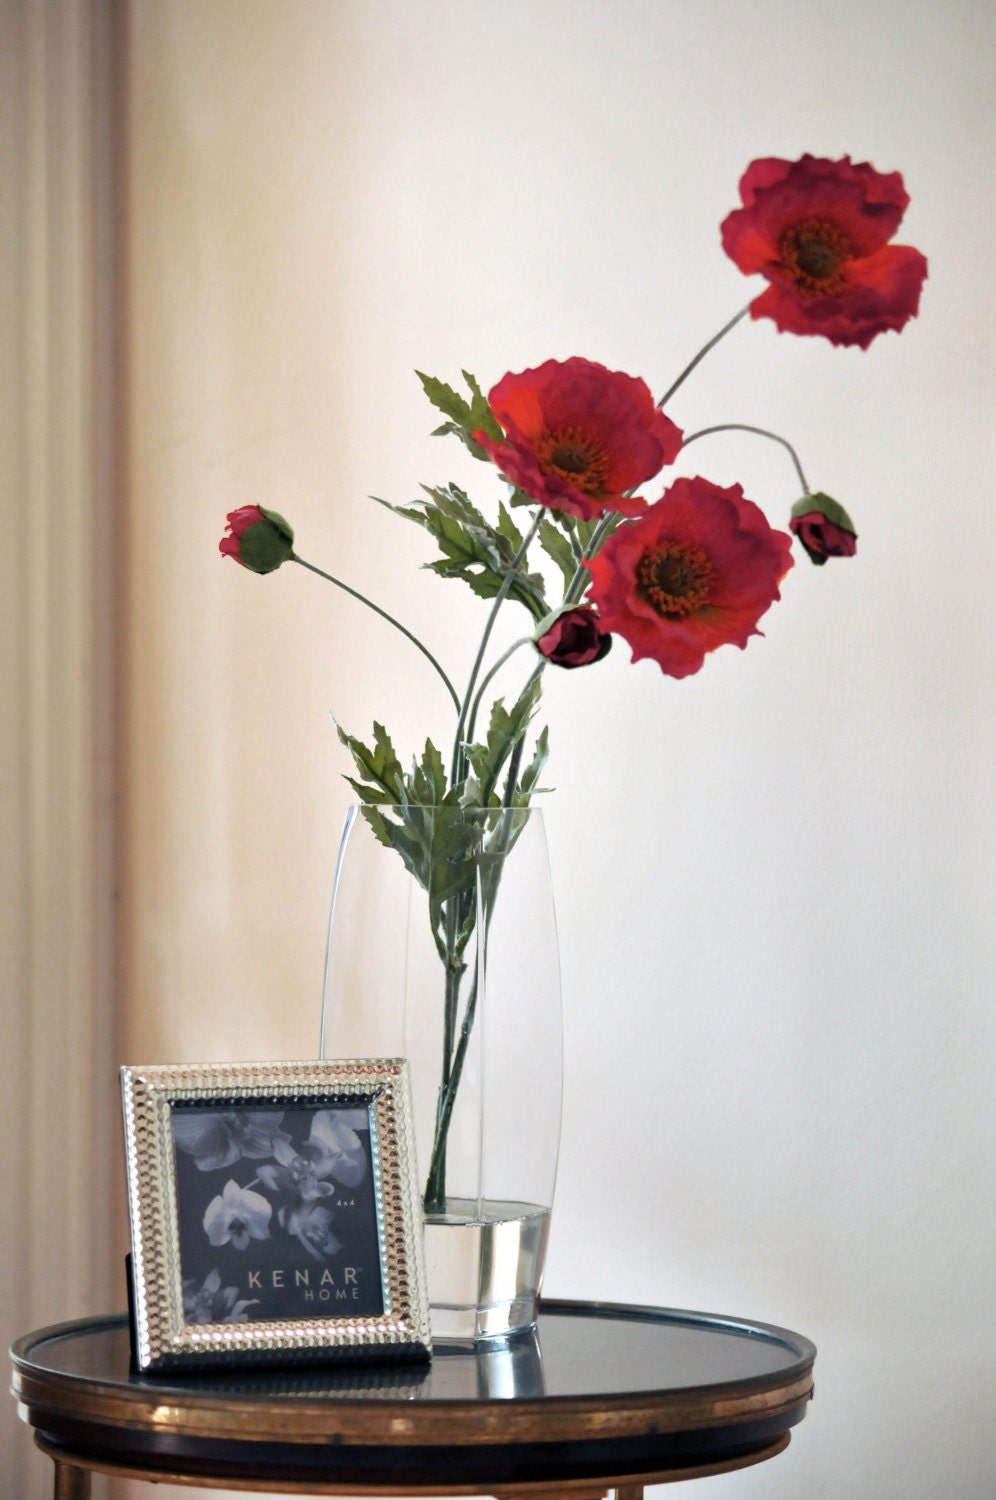 Flowers -Simply poppies paired with a square frame - NothingBudBlooms